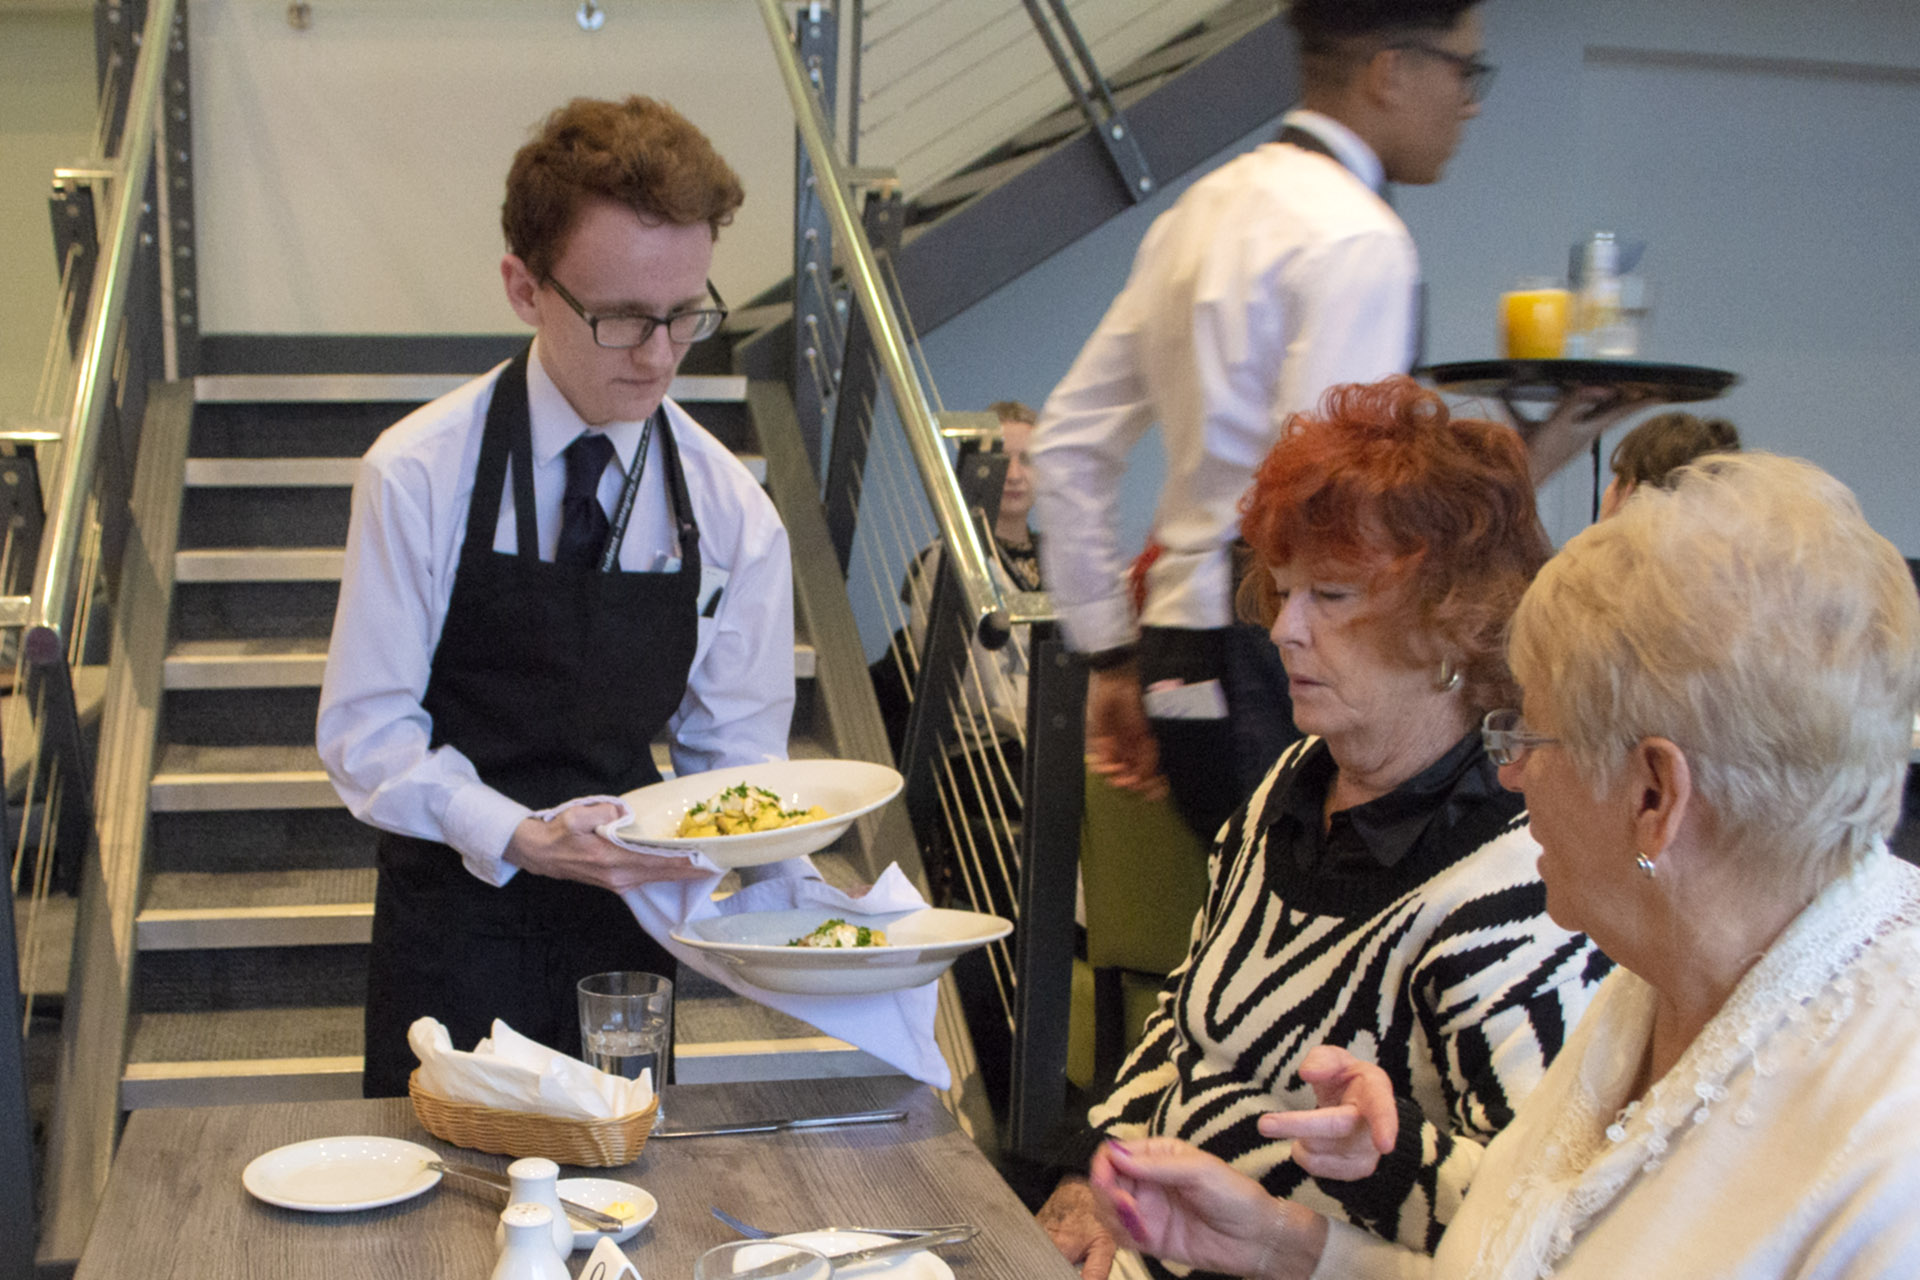 A Hospitality student serving guests at the City Restaurant.